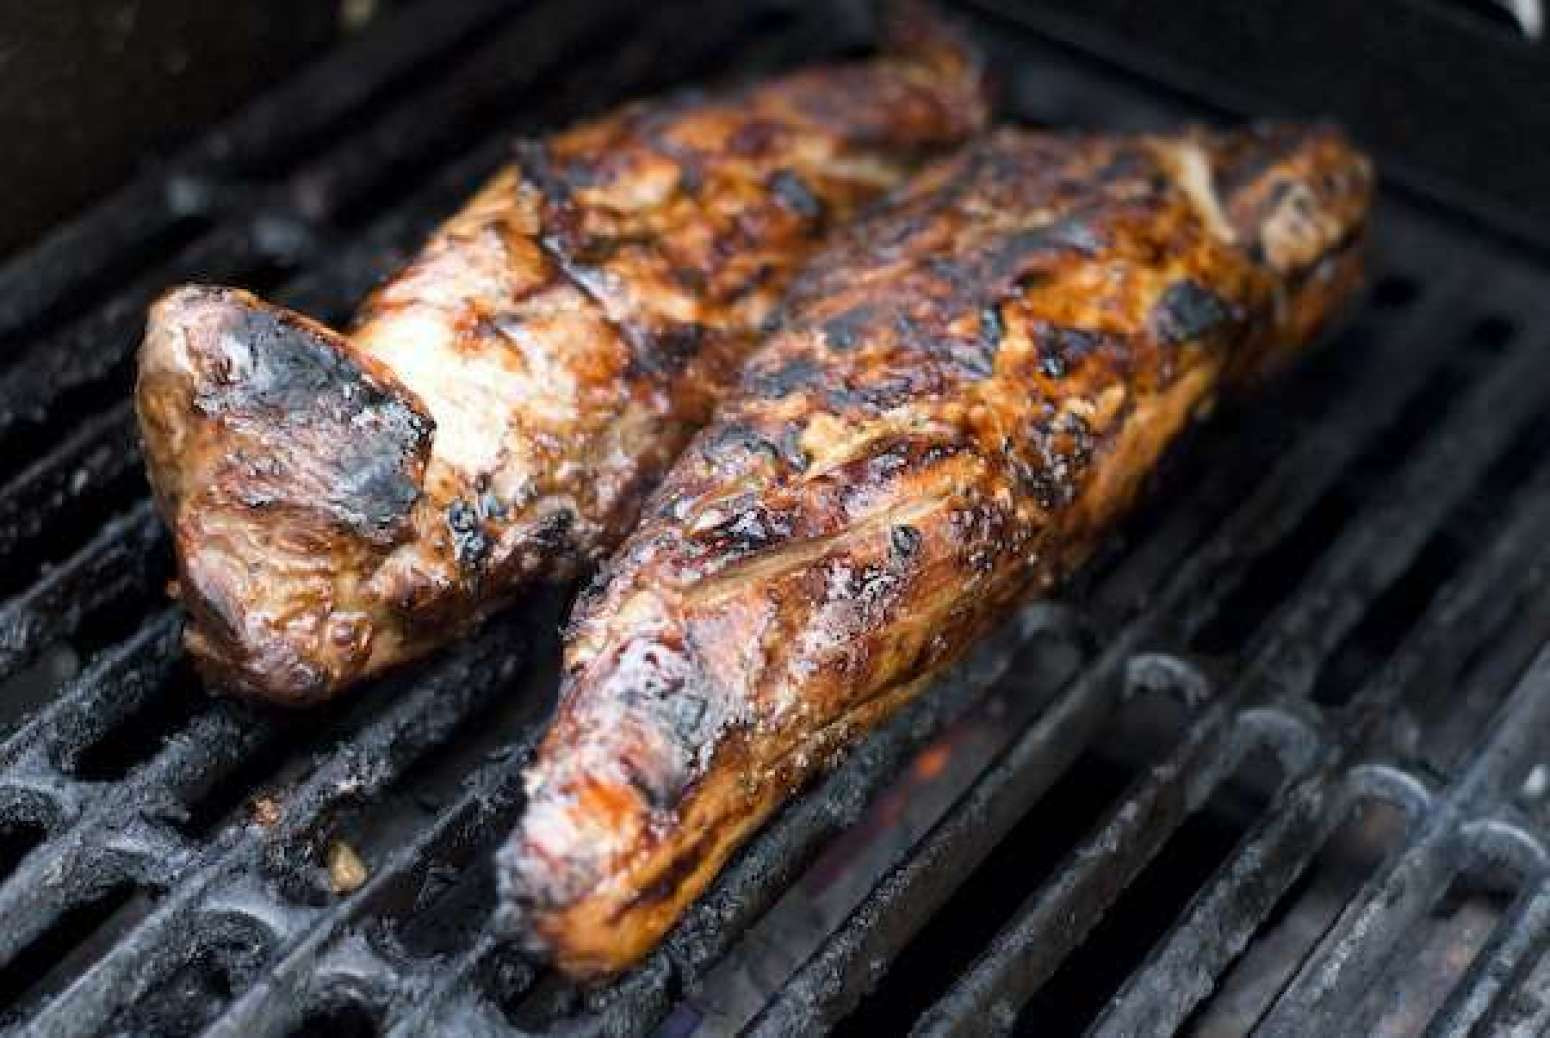 Cooking Pork Loin On Grill
 Marinated and Grilled Pork Tenderloin Recipe